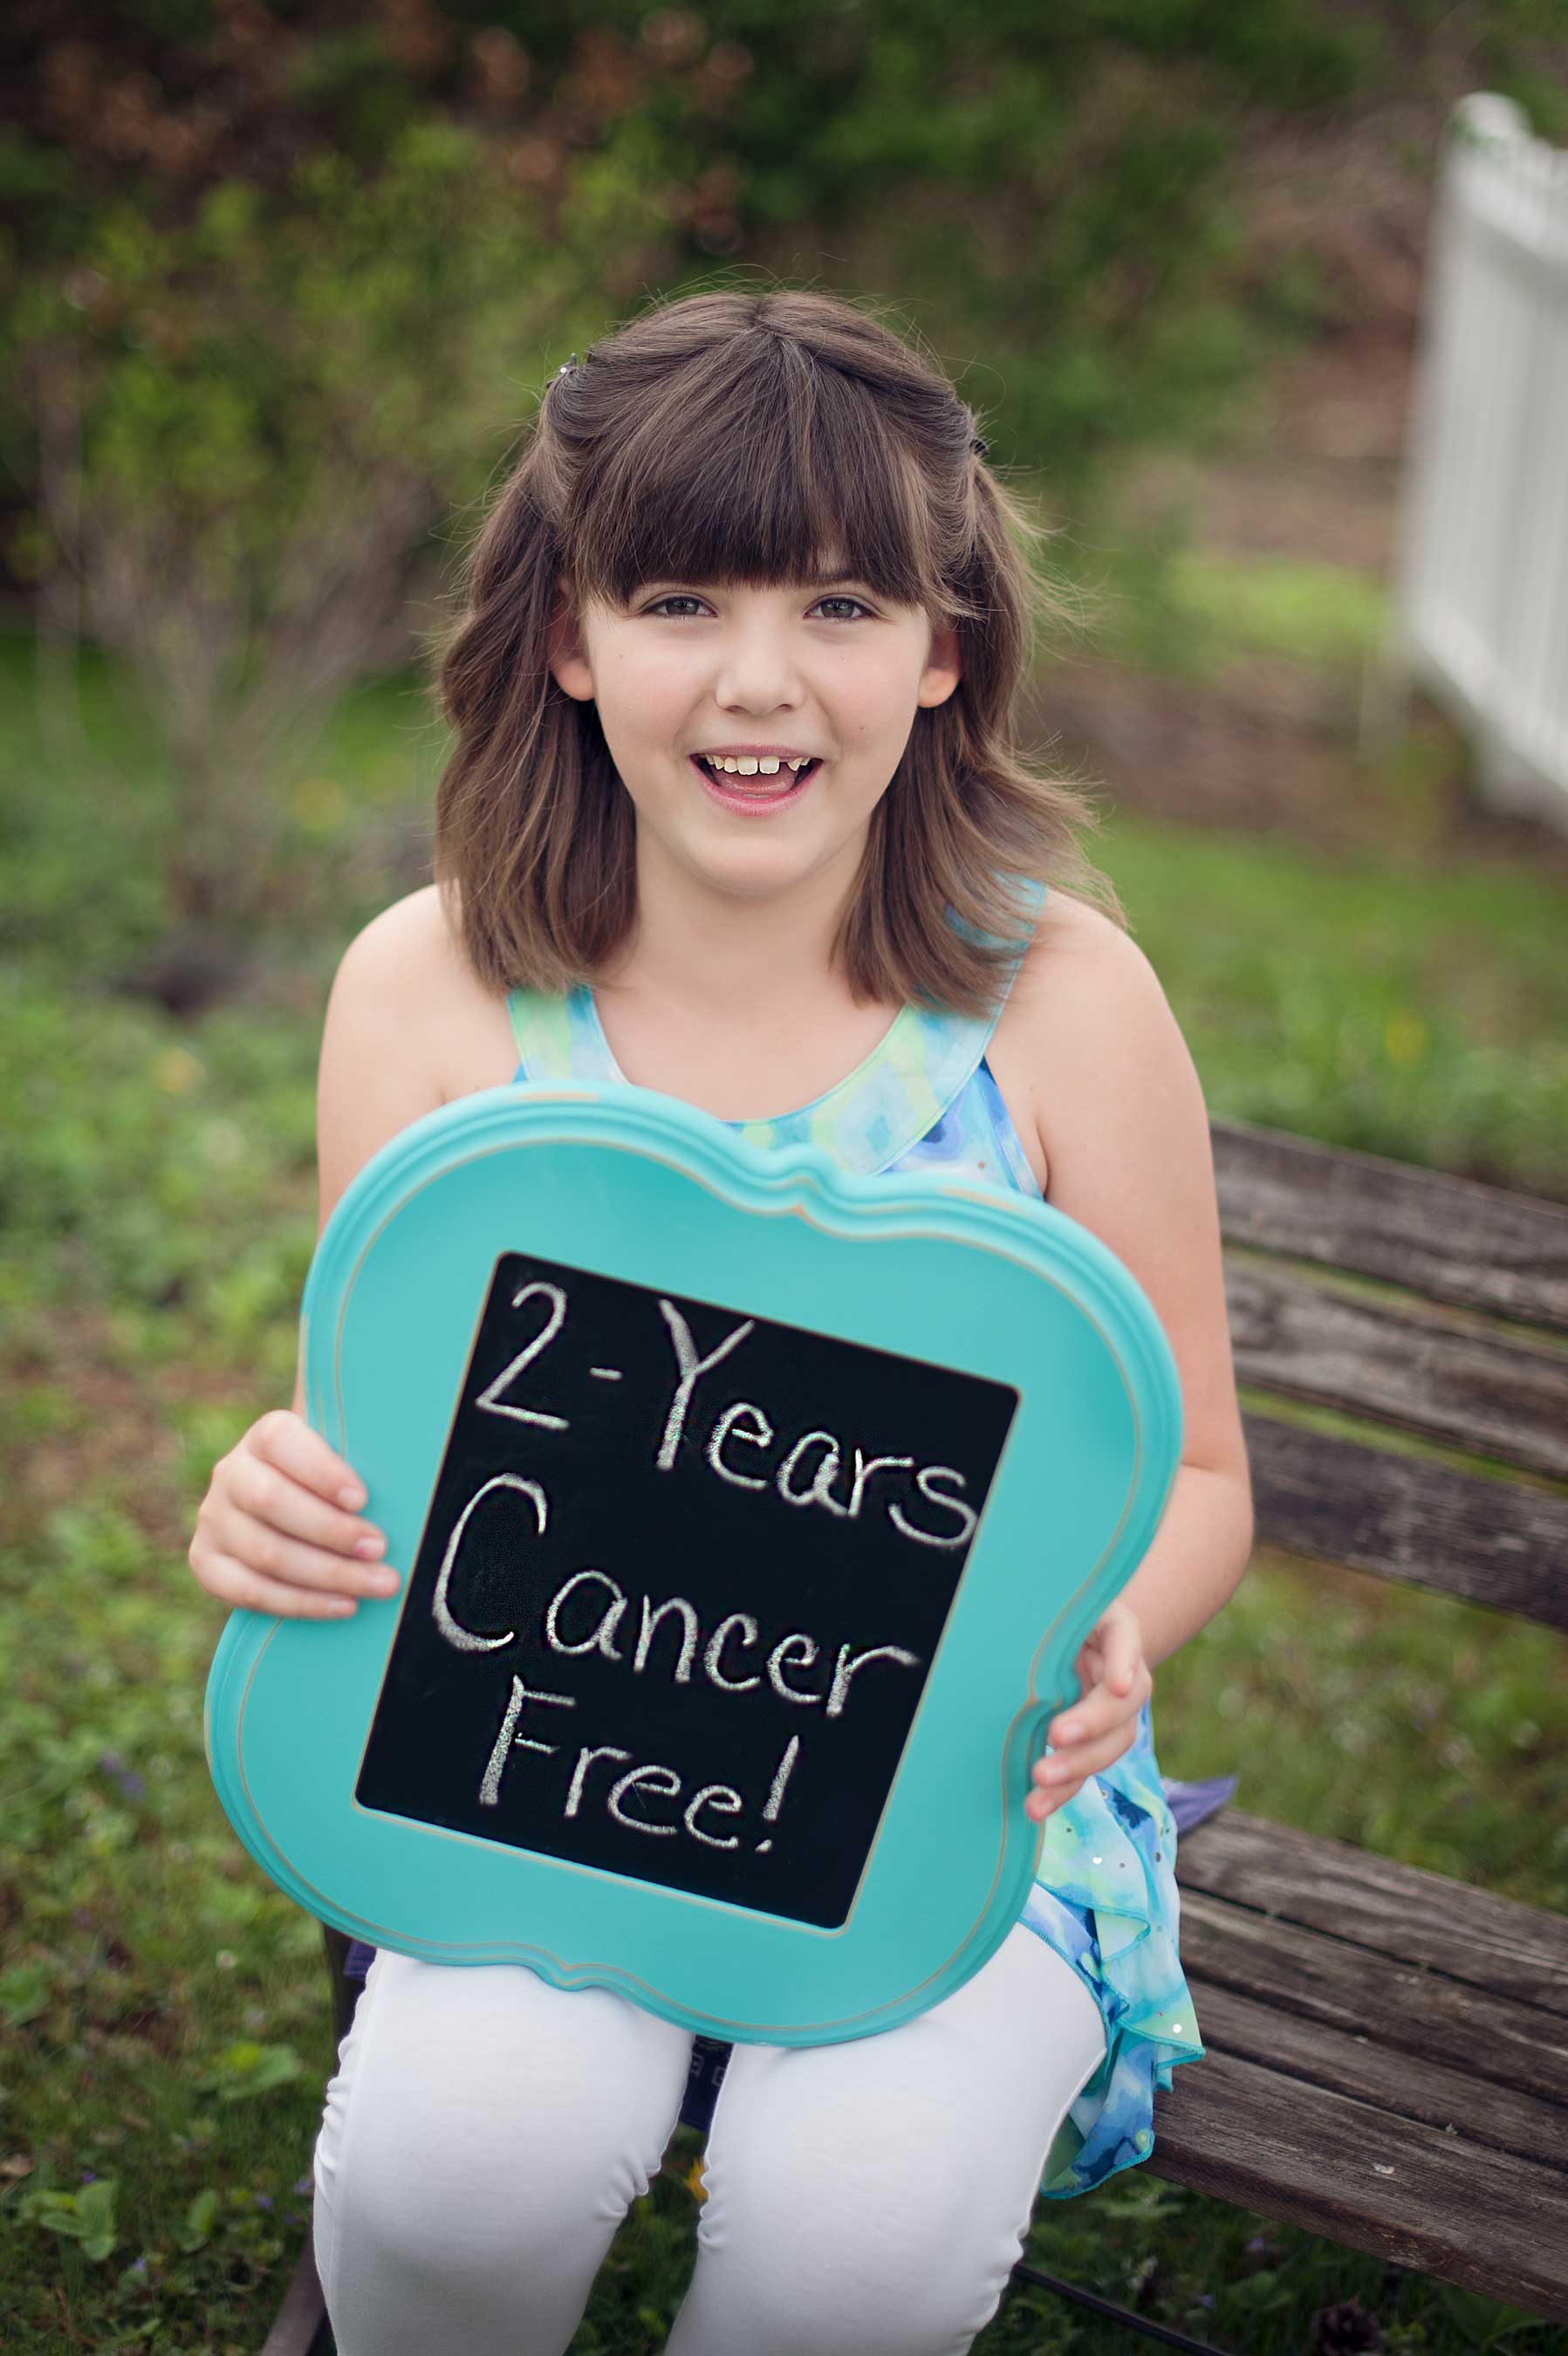 The first pediatric patient treated with genetically engineered T cells therapy is Emily Whitehead, whose story has been widely chronicled in the media. Emily is still thriving two years after first being treated.